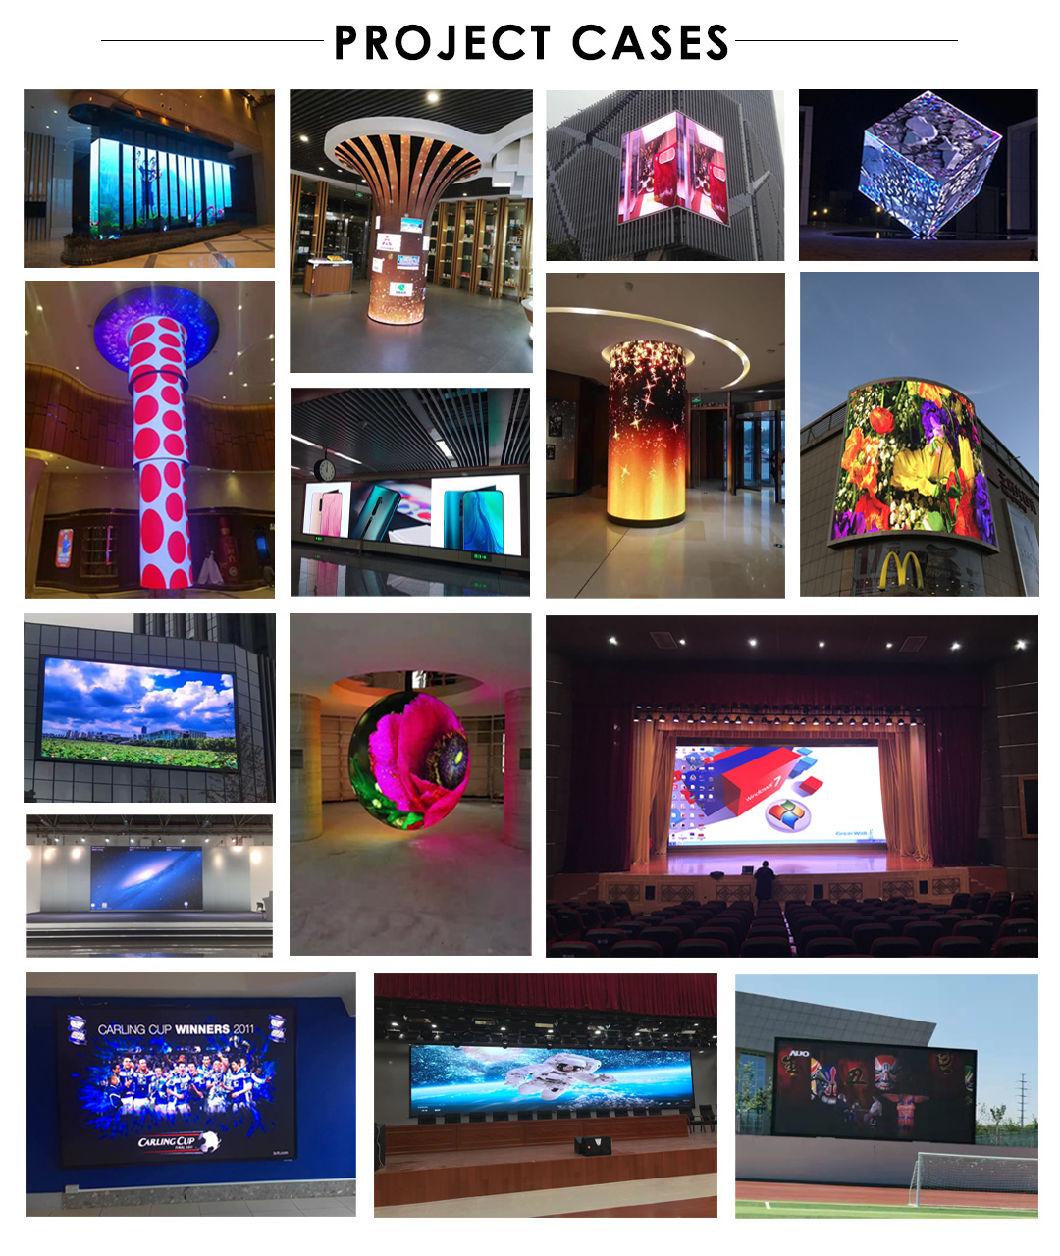 Indoor Full Color LED Display P1.667 with Fine Pitch 1.667mm LED Display Screen